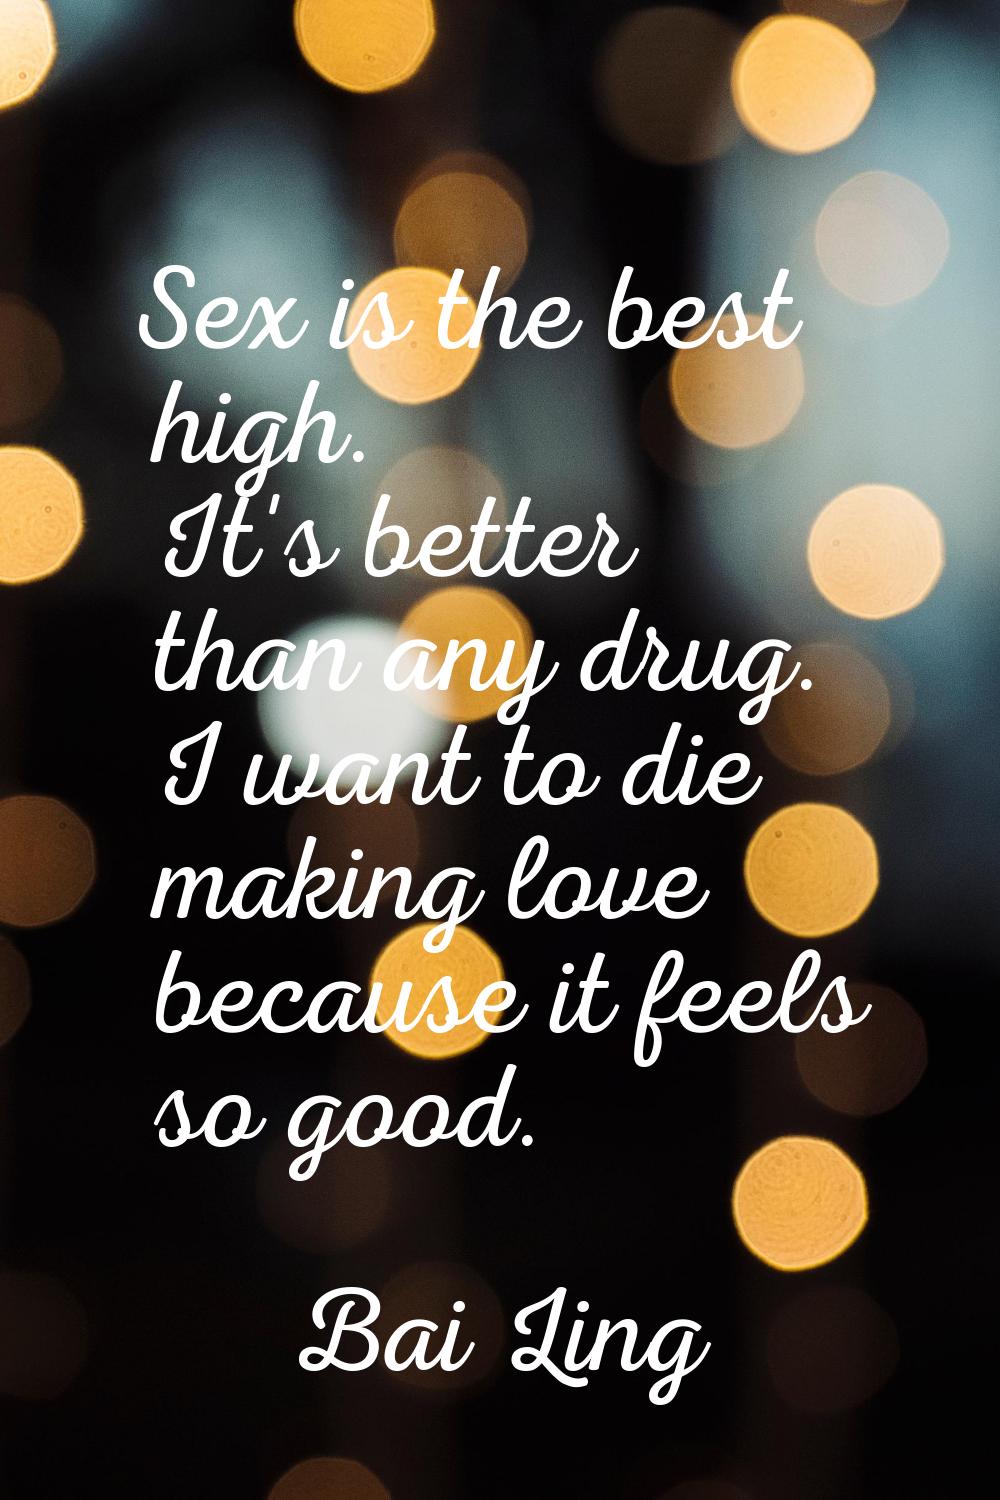 Sex is the best high. It's better than any drug. I want to die making love because it feels so good